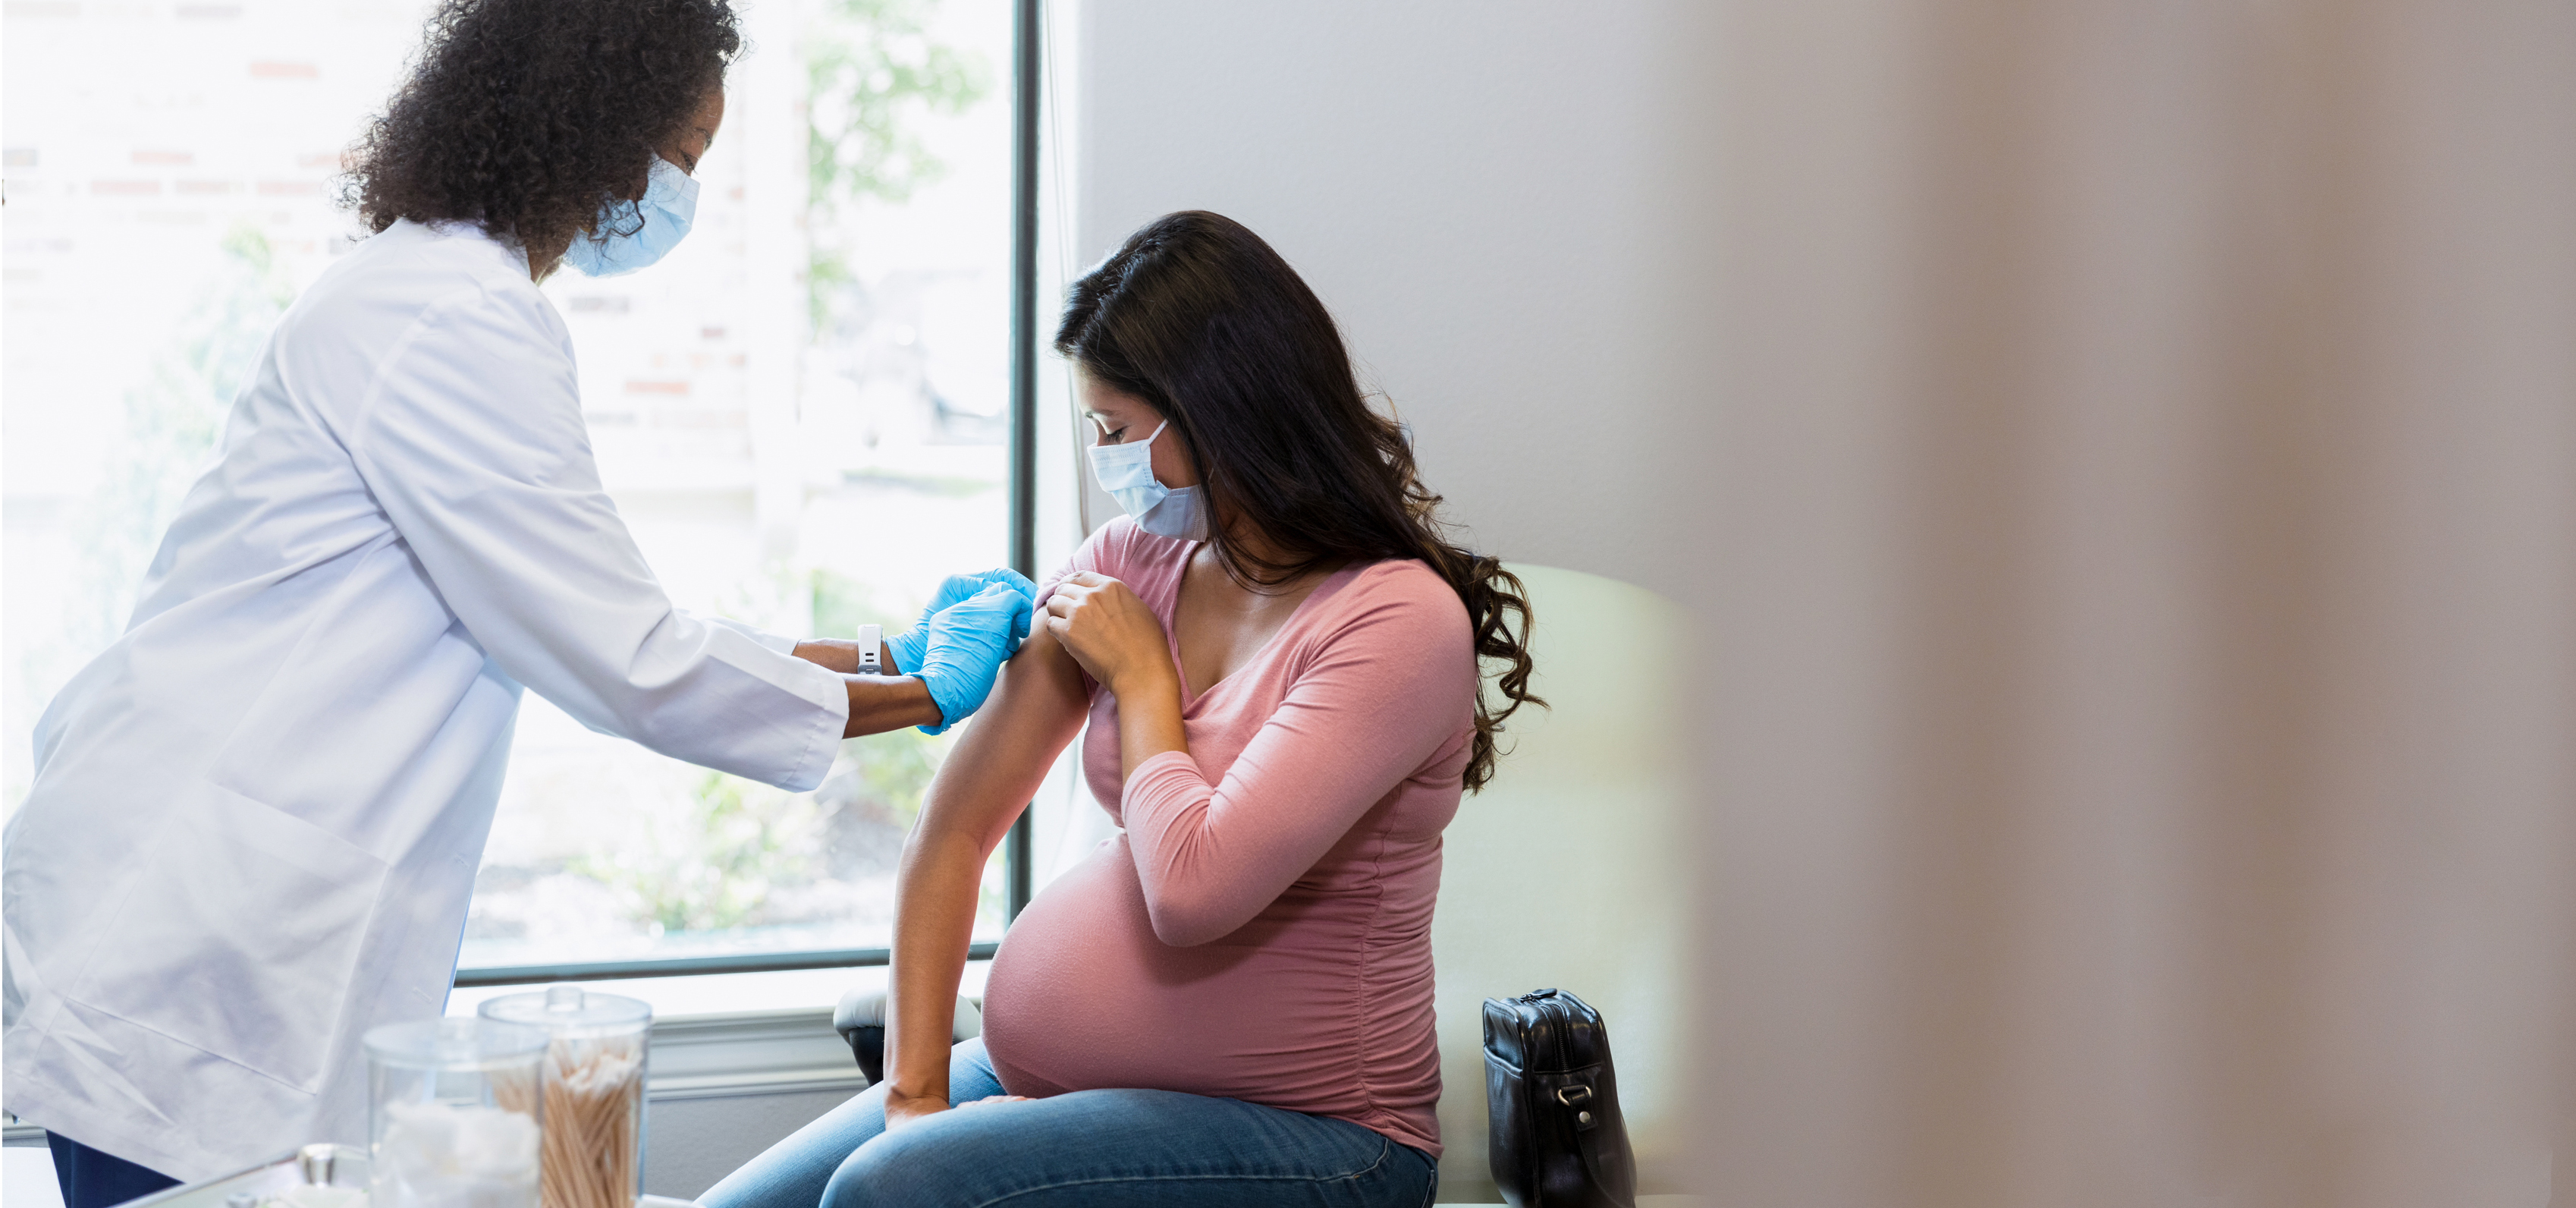 Five facts about the COVID-19 vaccine for pregnant individuals